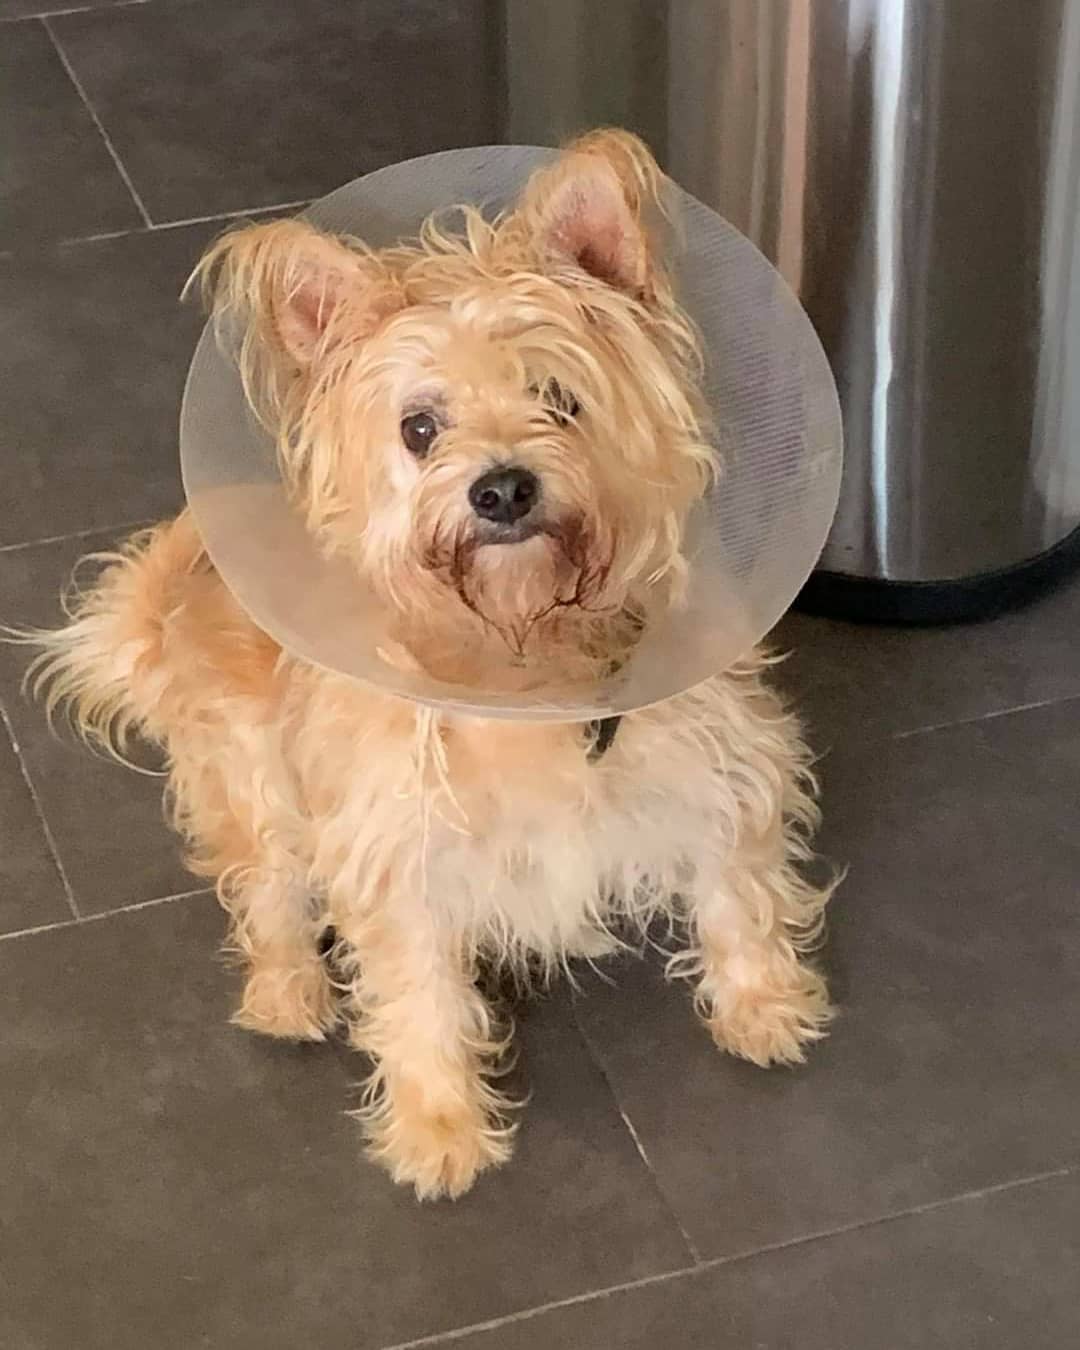 Welcome to ALDR, Lilly!💗

This sweet little 7 year old yorkie/chi mix came to us from the Hillsborough County Pet Resource Center after she was surrendered with several of her housemates when their owner went into assisted living and was not expected to make a recovery. 💔

Lilly is such a lovebug that is the happiest when she is as close to you as possible snuggling. She also loves giving kisses, going on walks and is VERY polite on a leash and is potty trained. Lilly is currently in a foster home with small and large dog, as well as a cat and seems most comfortable around small dogs, ignores the cat, and is fine with large dogs as long as they don't get in her face. It's safe to say that she is the perfect little lady and so adorable! 😍

Lilly's ideal home would be with owners that are home most of the time, as she does have separation anxiety and prefers to spend as much of her time as possible with her person. 💗

If you are interested in adopting Lilly, please fill out the adoption application on our website at animalluvrs.org, or email us at animalluvrsdreamrescue@gmail.com for more information. <a target='_blank' href='https://www.instagram.com/explore/tags/ALDR/'>#ALDR</a> <a target='_blank' href='https://www.instagram.com/explore/tags/rescueddogs/'>#rescueddogs</a> <a target='_blank' href='https://www.instagram.com/explore/tags/rescue/'>#rescue</a> <a target='_blank' href='https://www.instagram.com/explore/tags/rescueofinstagram/'>#rescueofinstagram</a> <a target='_blank' href='https://www.instagram.com/explore/tags/nonprofit/'>#nonprofit</a> <a target='_blank' href='https://www.instagram.com/explore/tags/fosteringsaveslives/'>#fosteringsaveslives</a> <a target='_blank' href='https://www.instagram.com/explore/tags/doglover/'>#doglover</a> <a target='_blank' href='https://www.instagram.com/explore/tags/adoptdontshop/'>#adoptdontshop</a> <a target='_blank' href='https://www.instagram.com/explore/tags/dogsoftampabay/'>#dogsoftampabay</a> <a target='_blank' href='https://www.instagram.com/explore/tags/pupsoftampa/'>#pupsoftampa</a>